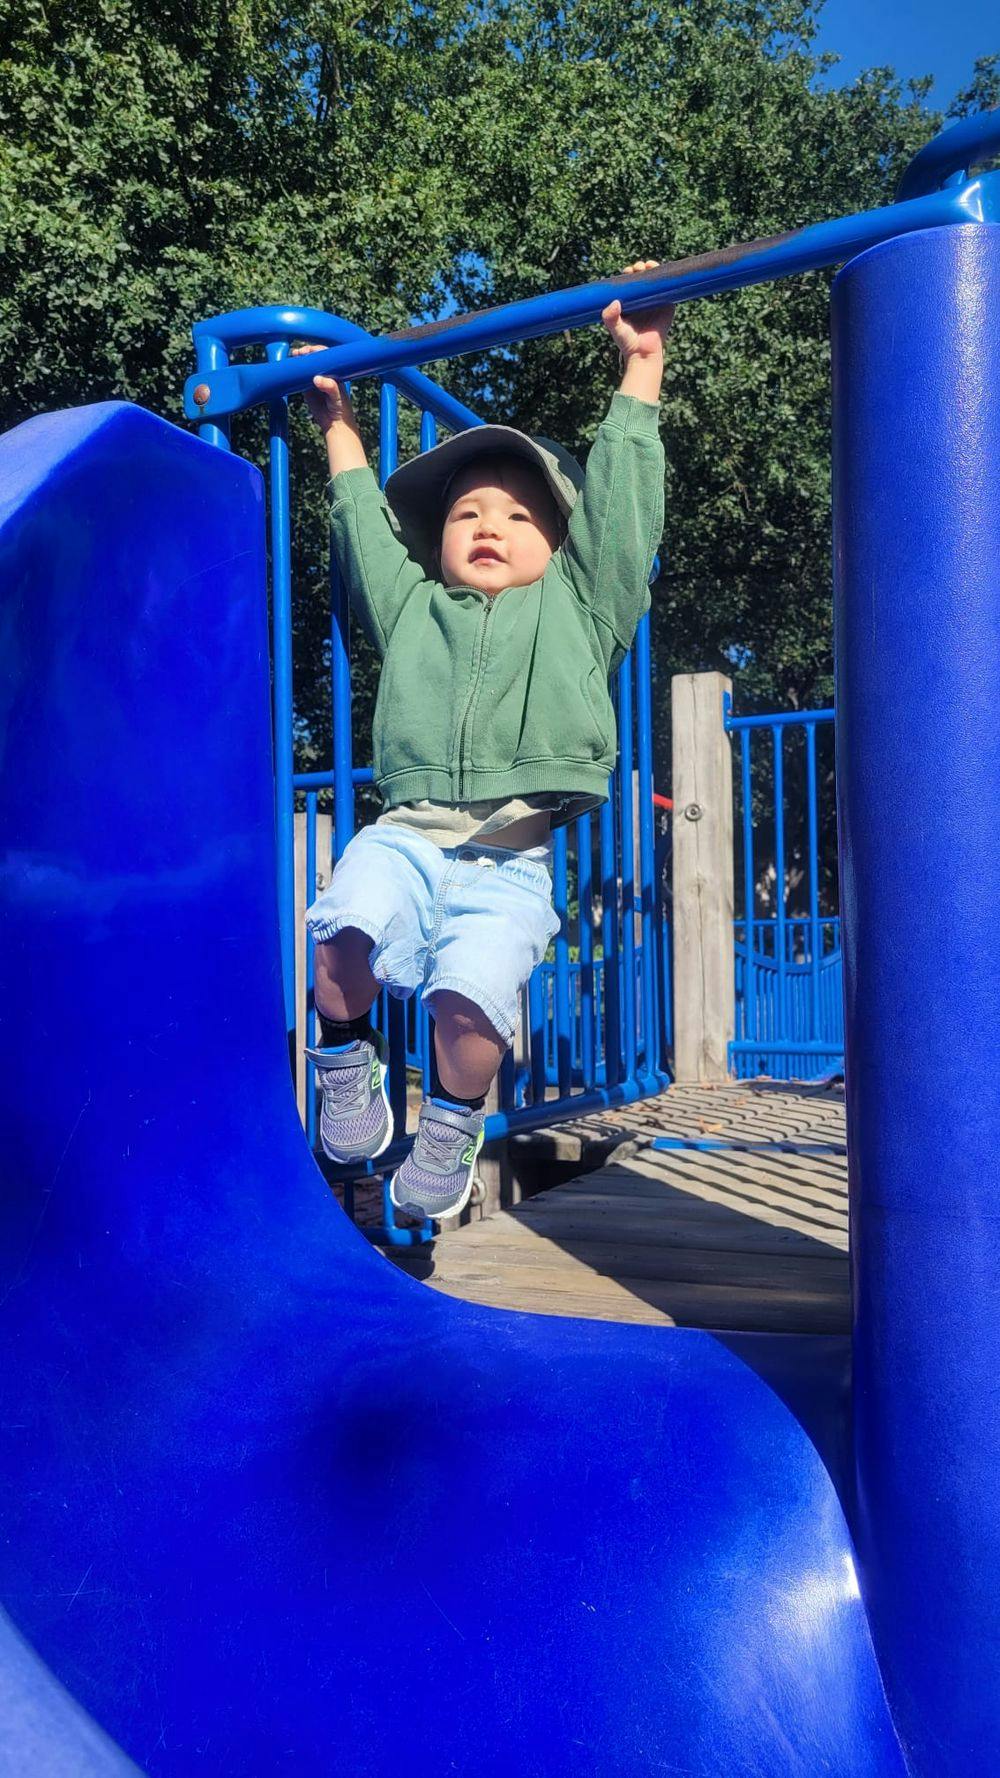 Rob's child hanging on a blue bar in a playground